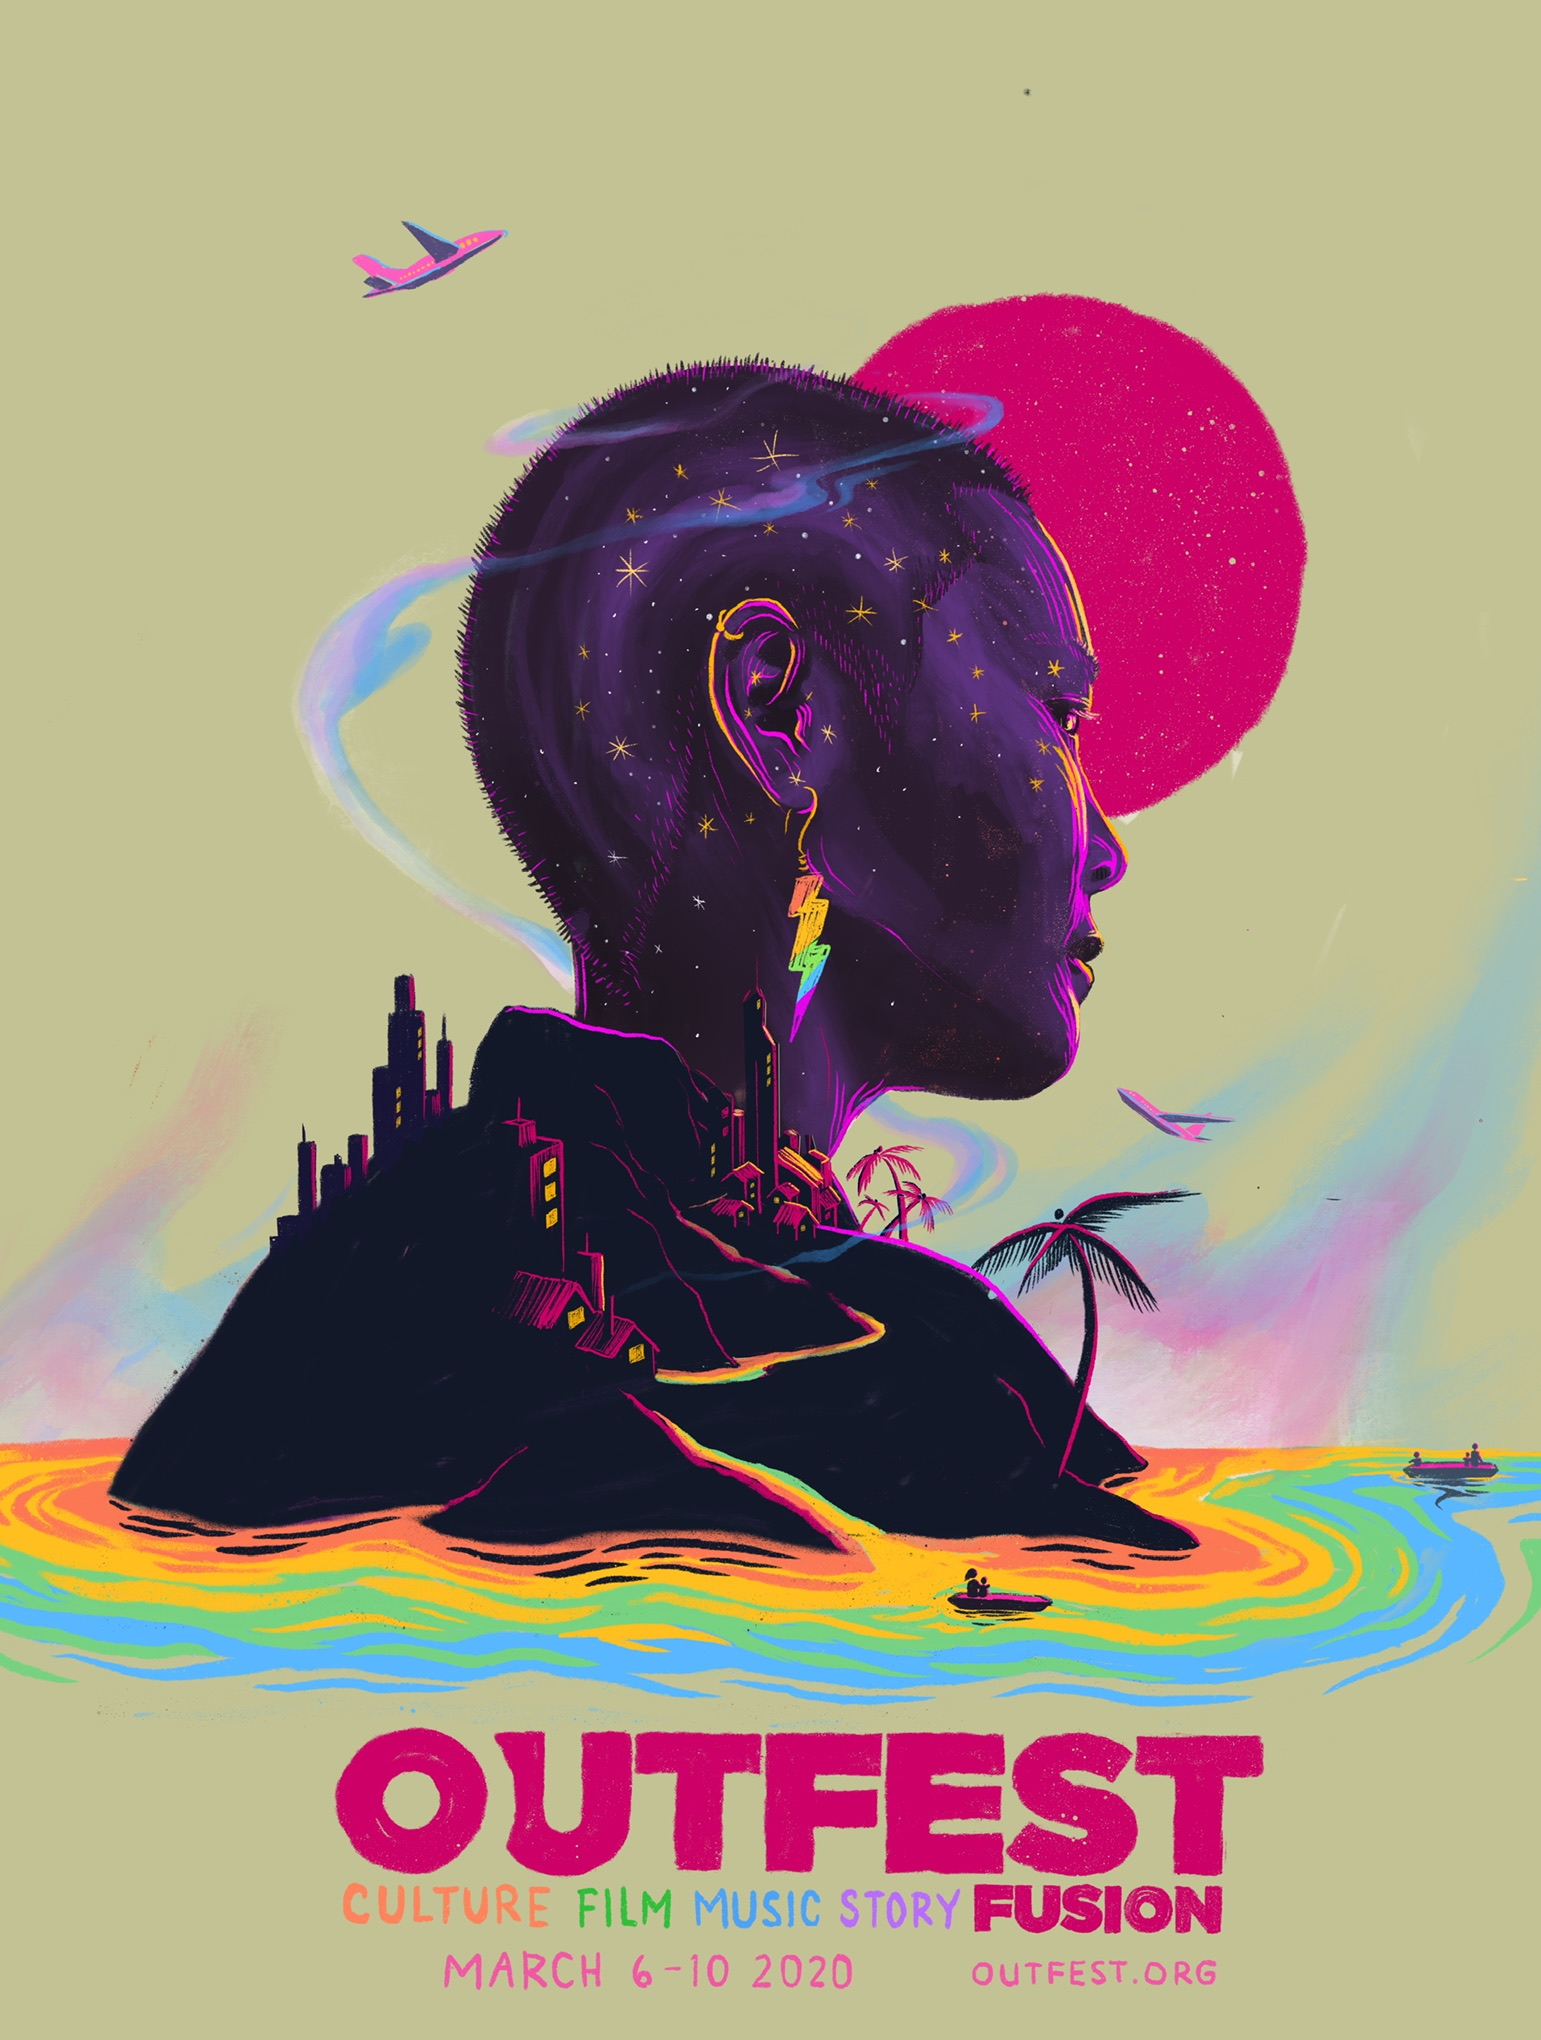 Outfest Artwork by Jess X. Snow